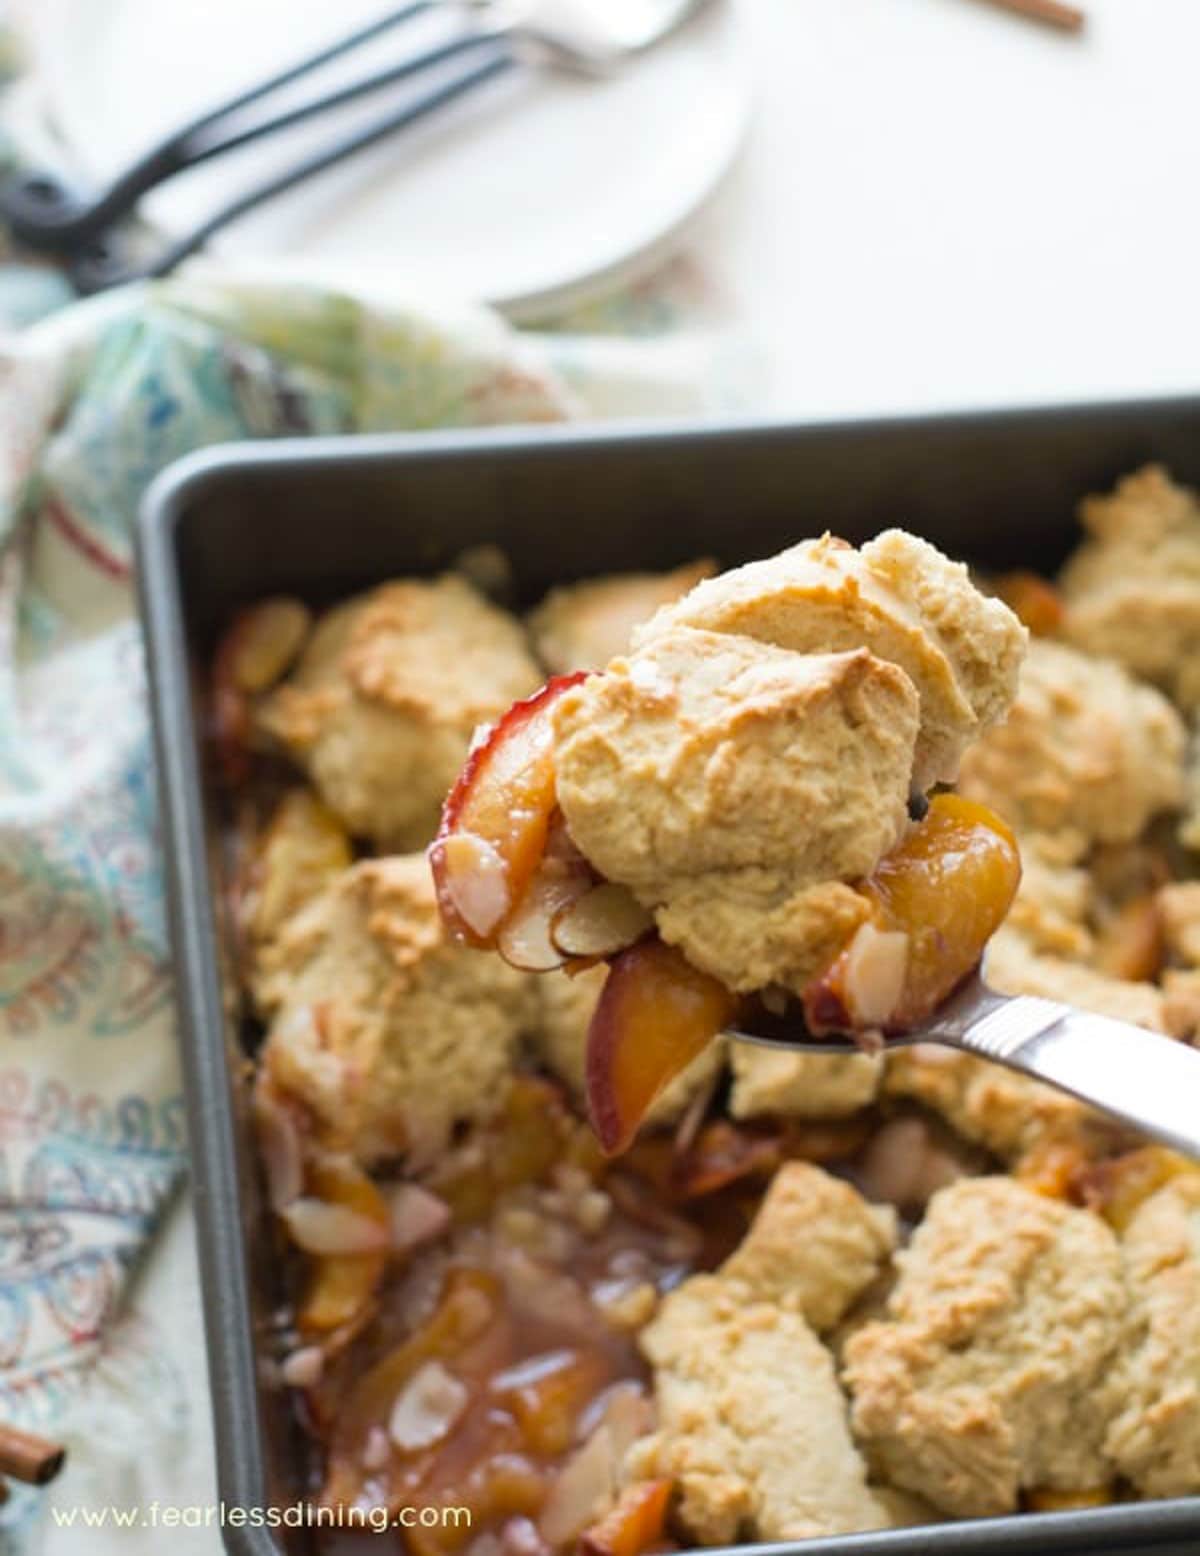 scooping a serving of cobbler out of the pan